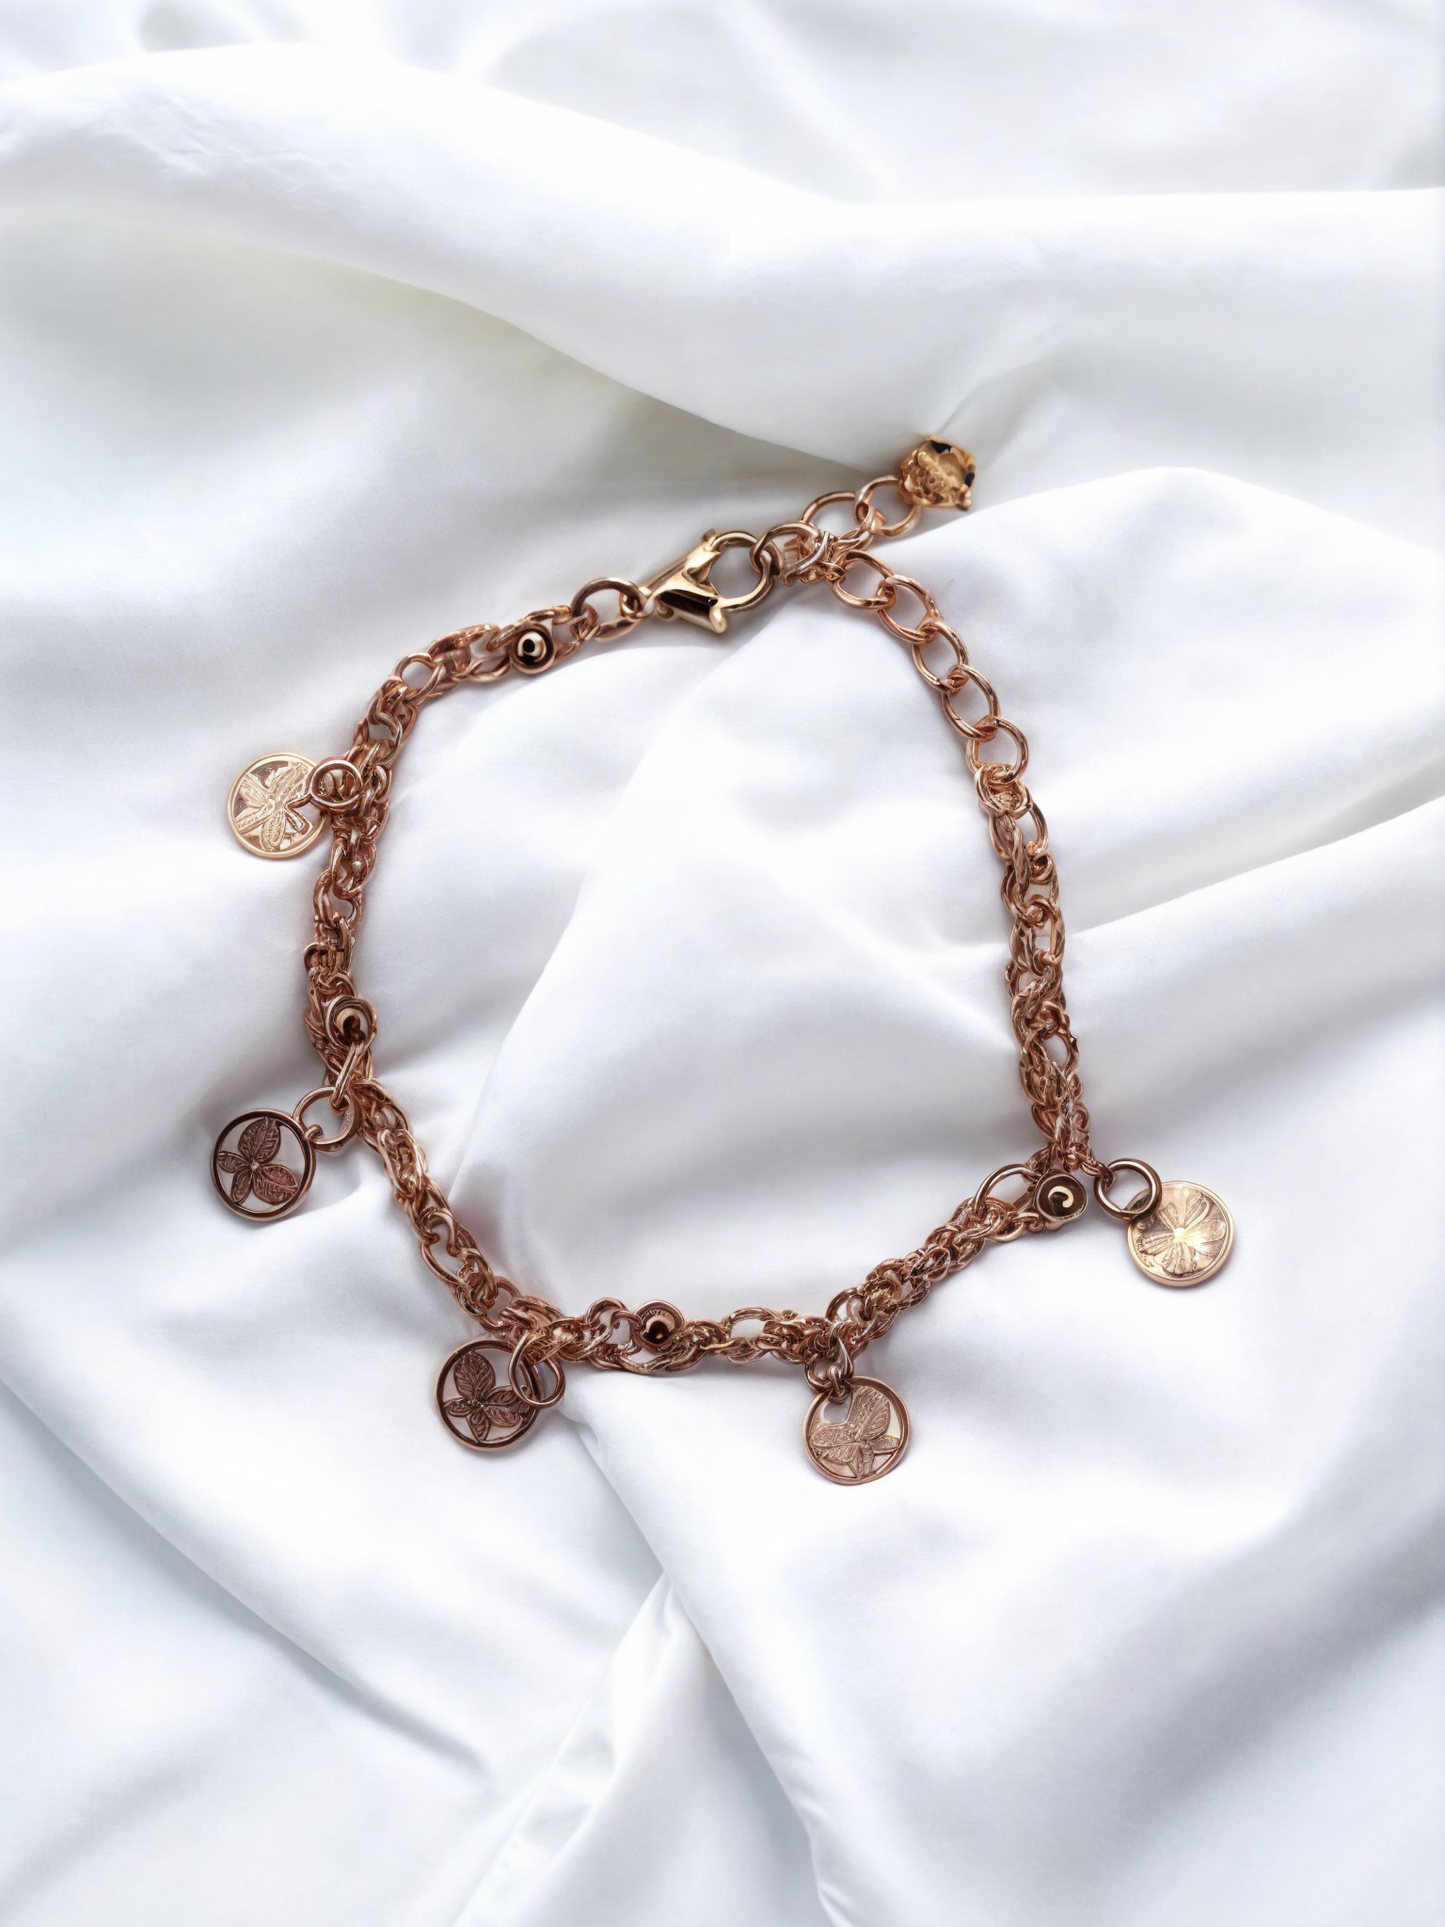 Stylish Double Layered Adjustable Bracelet with Butterfly Charms